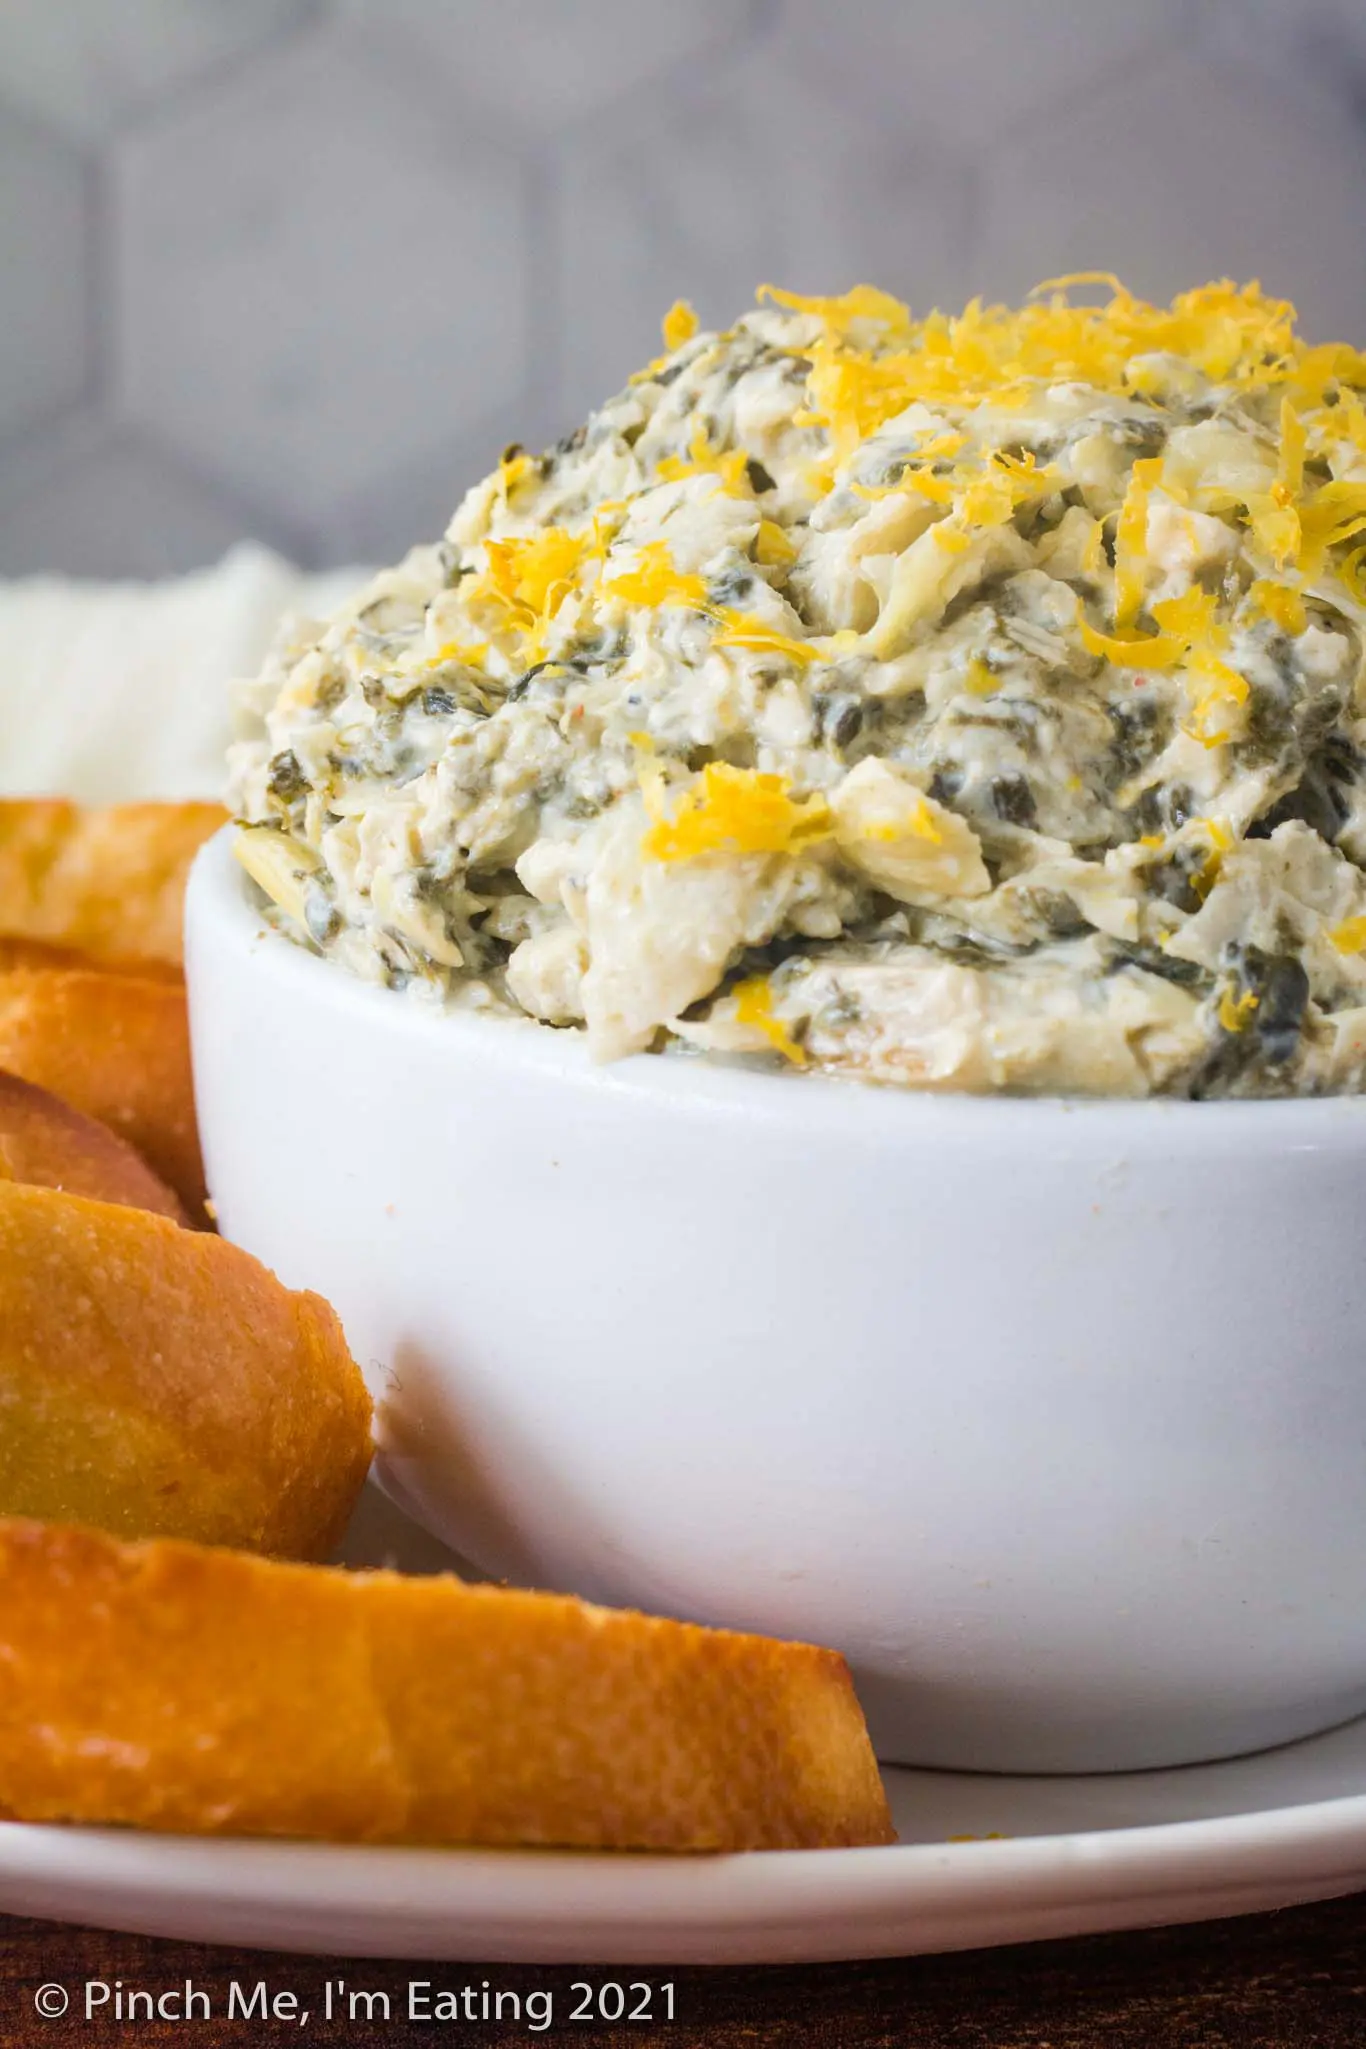 Cold Artichoke Spinach Dip with Lemon